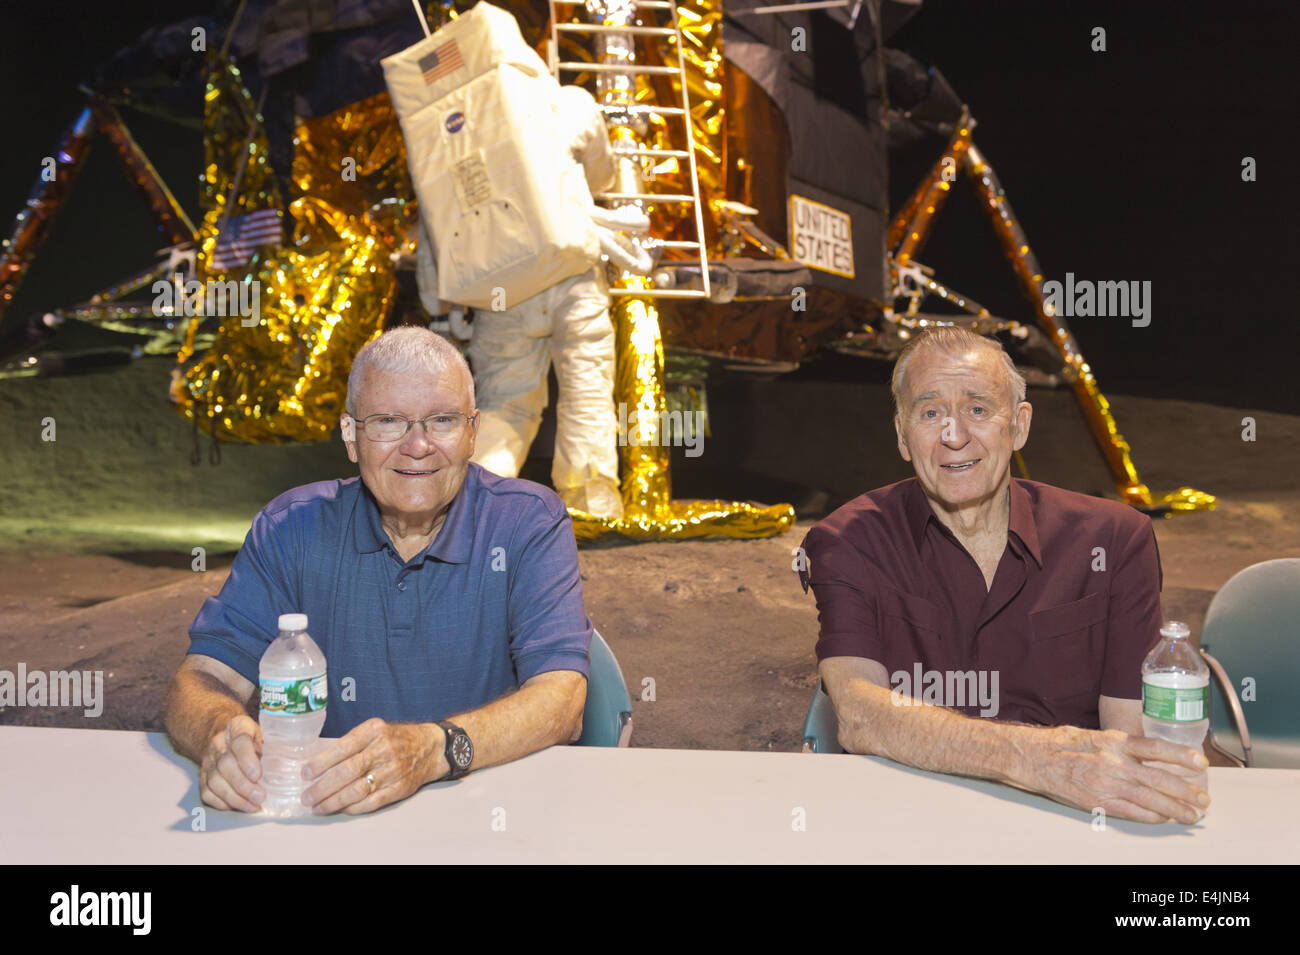 July 12, 2014 - Garden City, New York, U.S - L-R, former NASA Apollo astronauts FRED HAISE and WALTER CUNNINGHAM are at a Summer of '69 Celebration Event held at the Long Island Cradle of Aviation Museum, on the 45th Anniversary of NASA Apollo 11 LEM, Lunar Excursion Module, landing on the moon July 20, 1969. Haise, the lunar module pilot for Apollo 13 mission and Cunningham the lunar module pilot for the Apollo 7 mission were in the LEM Room during the reunion of former Northrop Grumman Aerospace Corporation employees. Behind them is Lunar Module LM-13 intended for Apollo 18 mission to Copern Stock Photo